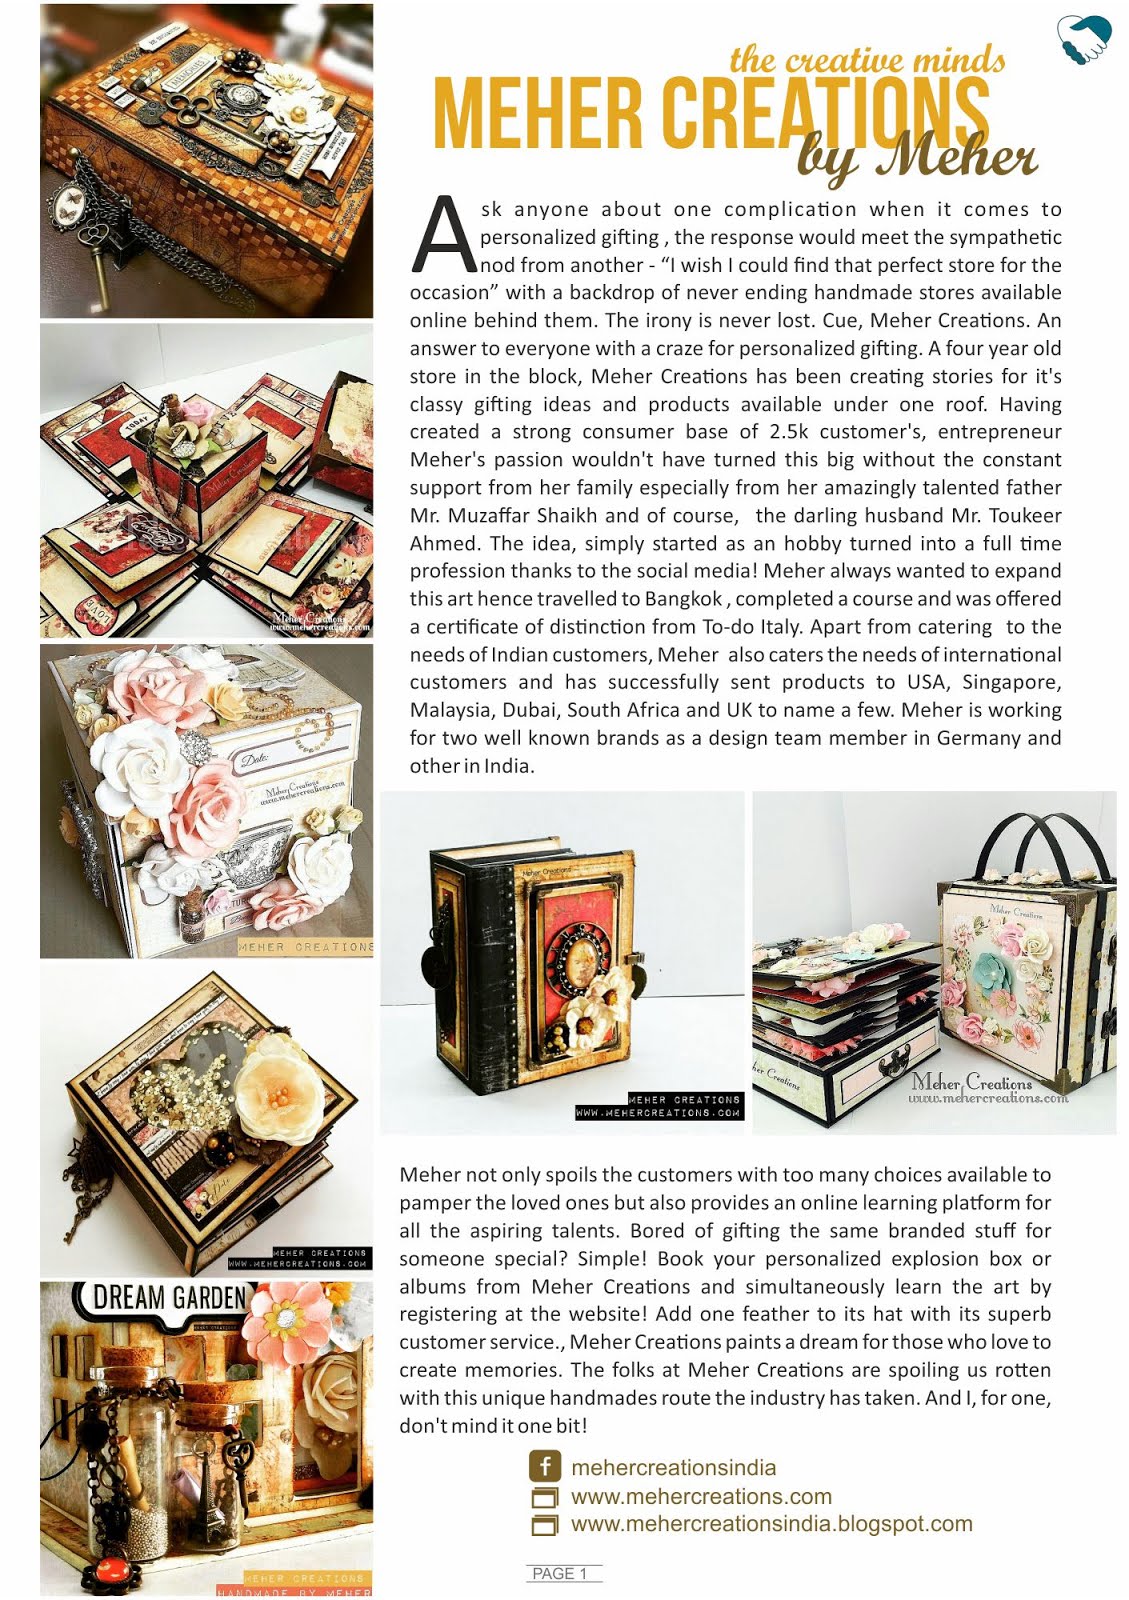 Article about Meher Creations